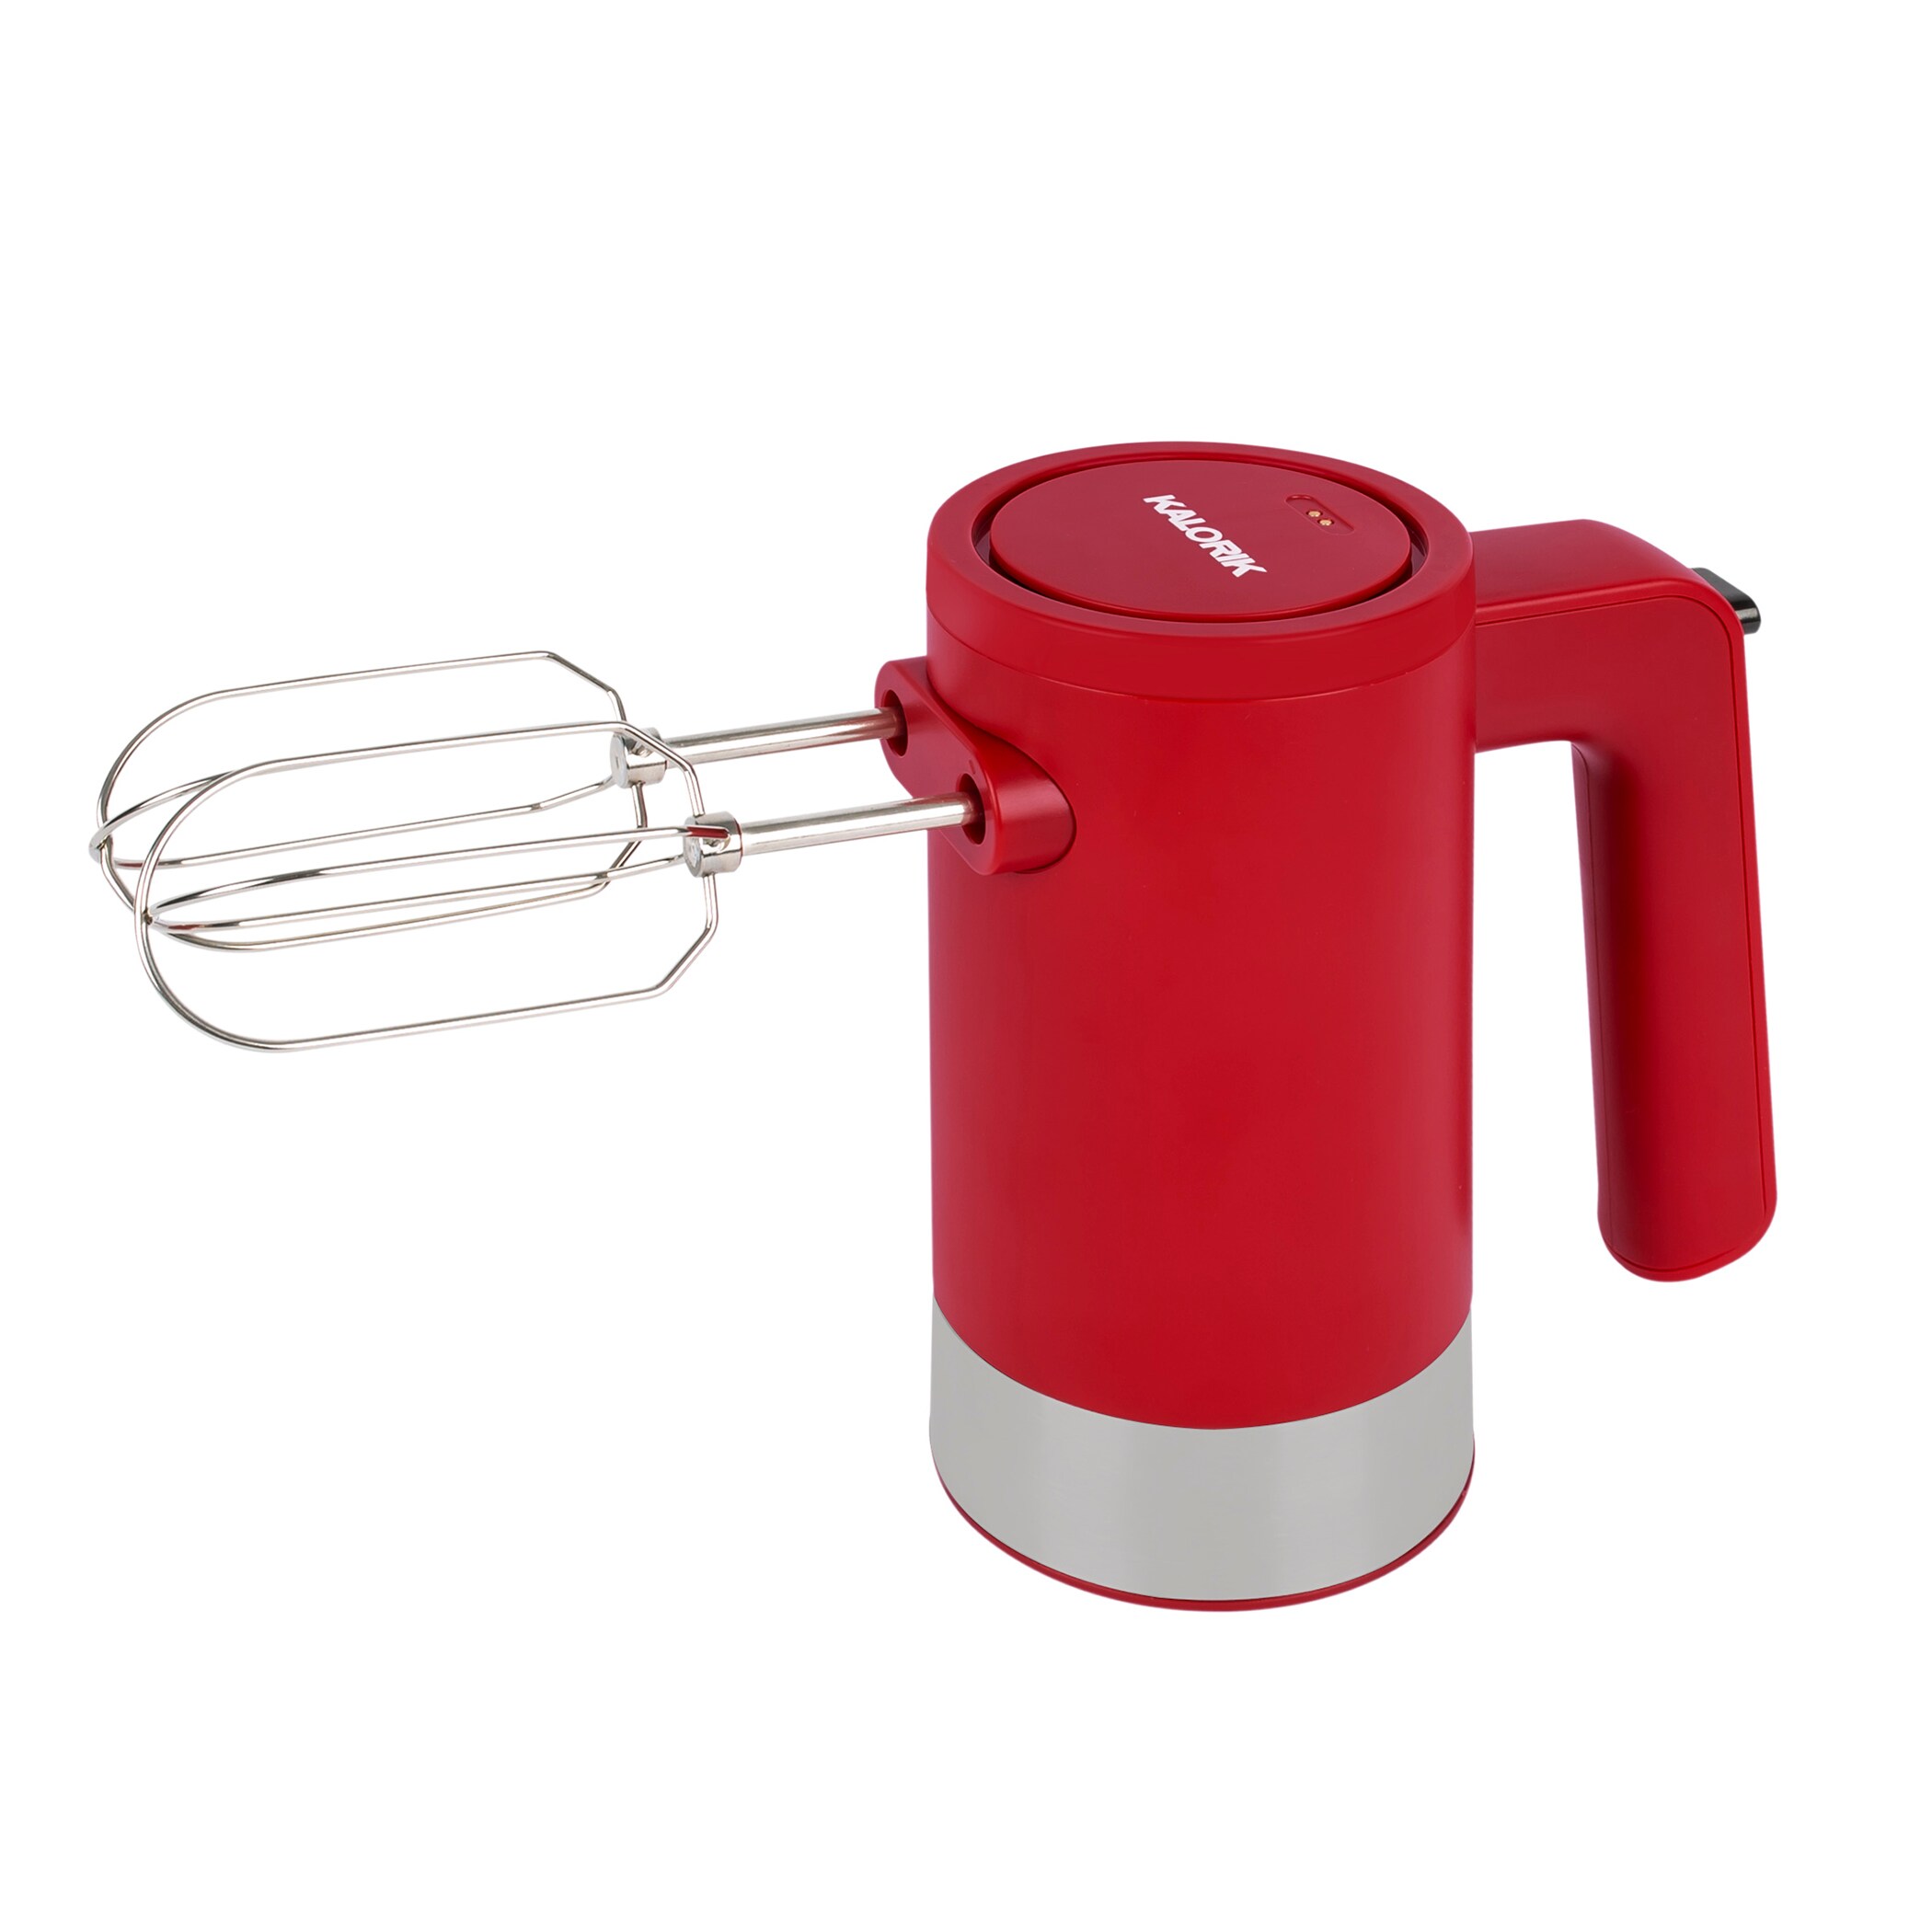 Kalorik Cordless Rechargeable Hand Mixer, Red - 5 Speeds, Wire Whisk &  Dough Hook Included - Perfect for Baking & Cooking - cETLus Safety Listed  in the Hand Mixers department at